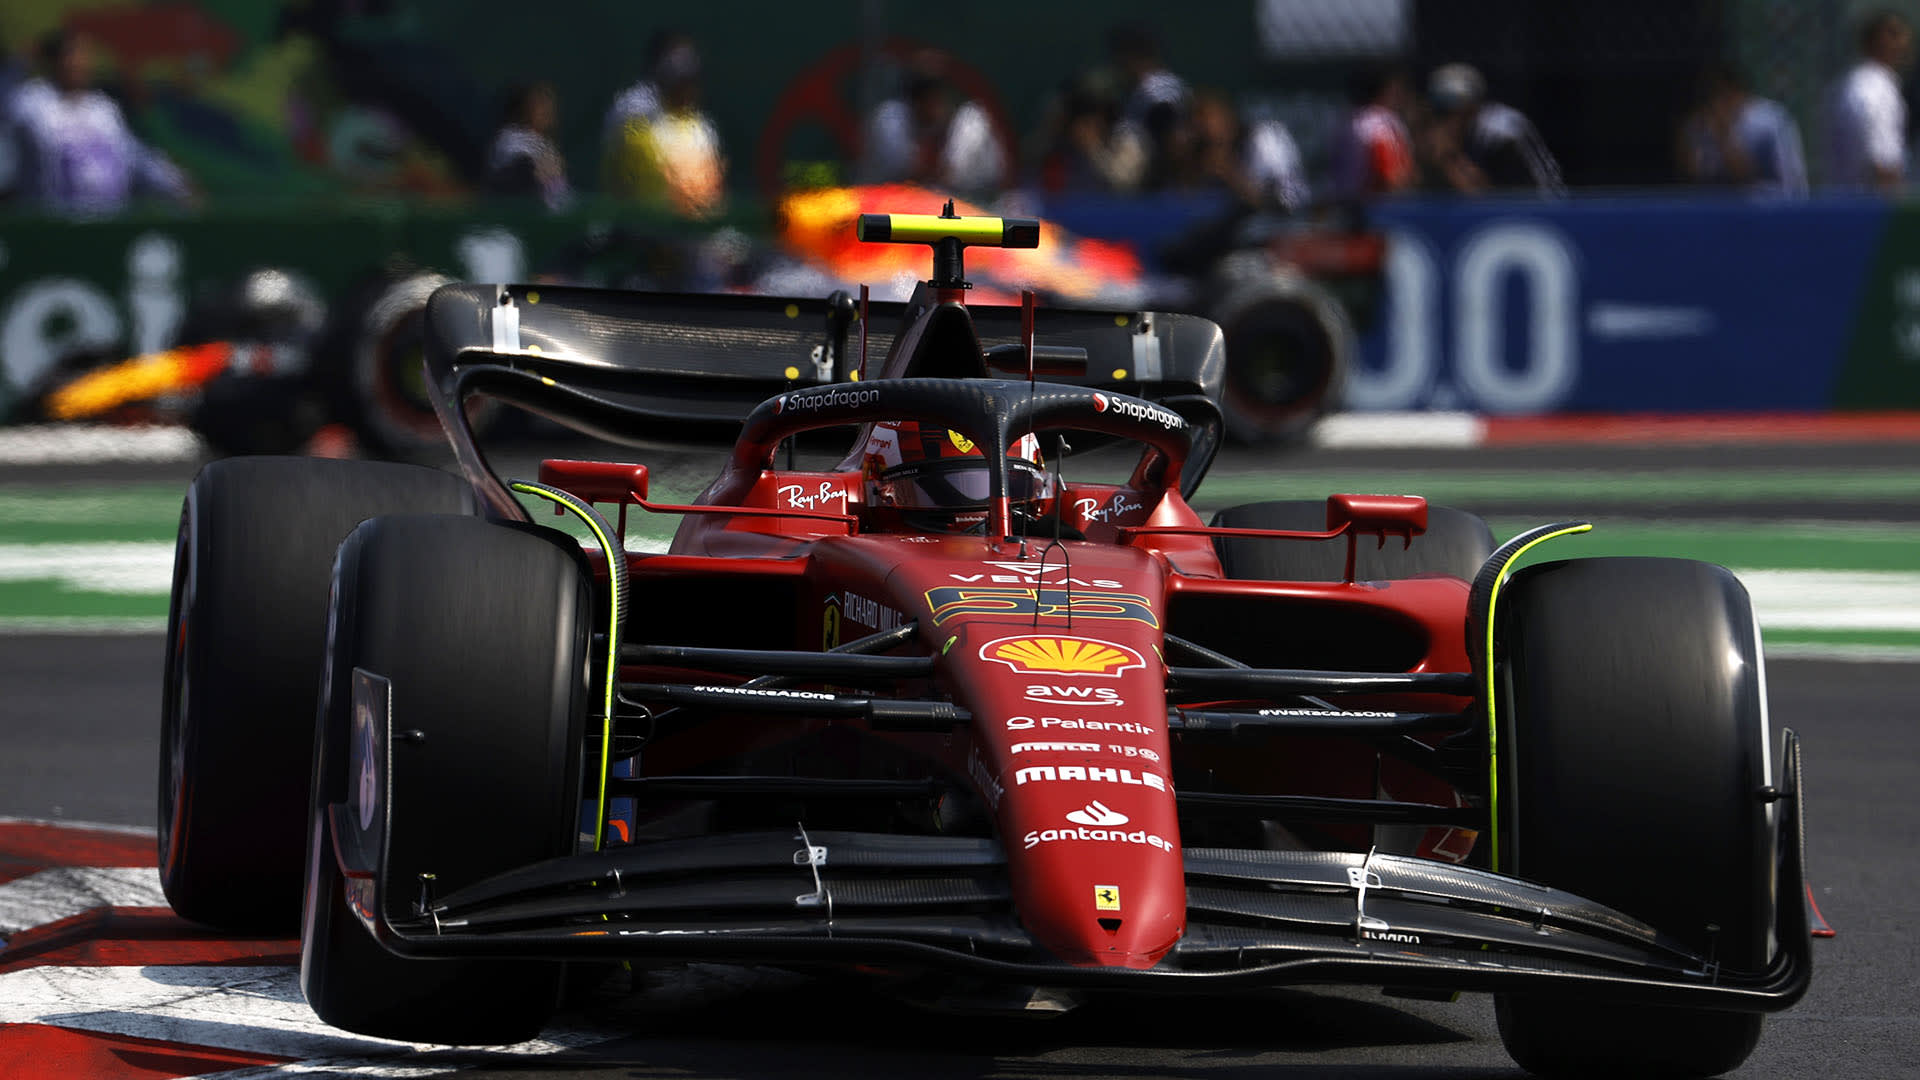 FP1 report and highlights from the 2022 Mexico City Grand Prix Sainz leads Ferrari 1-2 as Mexico City weekend gets under way Formula 1®